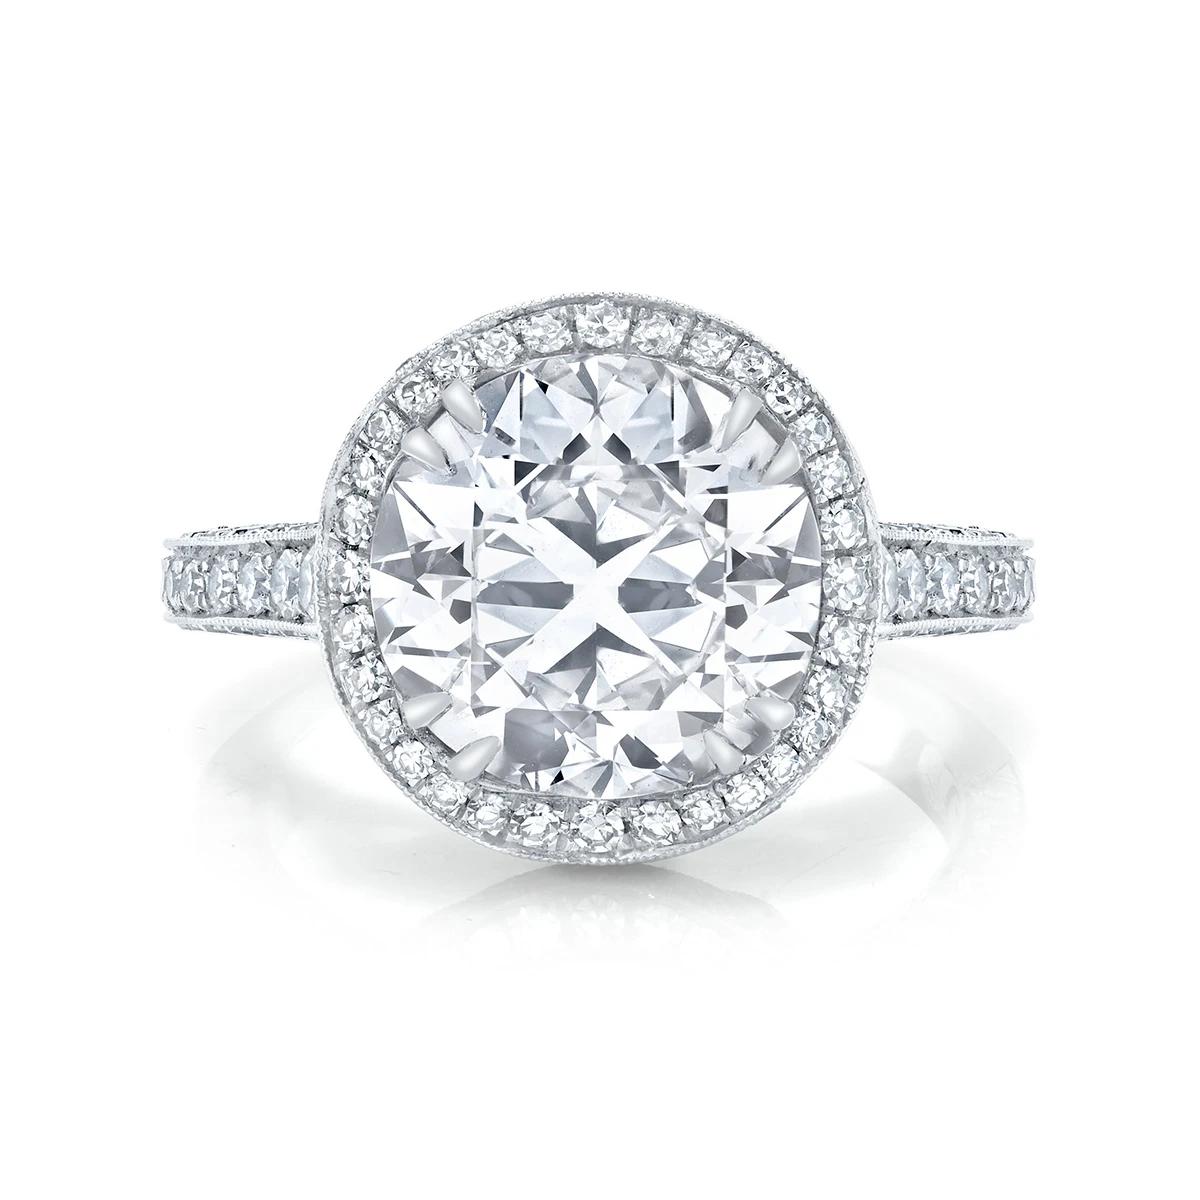 A sumptuous pairing of an impressive round brilliant-cut diamond weighing 4.06 cts., and a regal handmade platinum ring, accented by one hundred forty-two round-cut diamonds composing an elegant undulating border and ornate gallery.

Center Stone